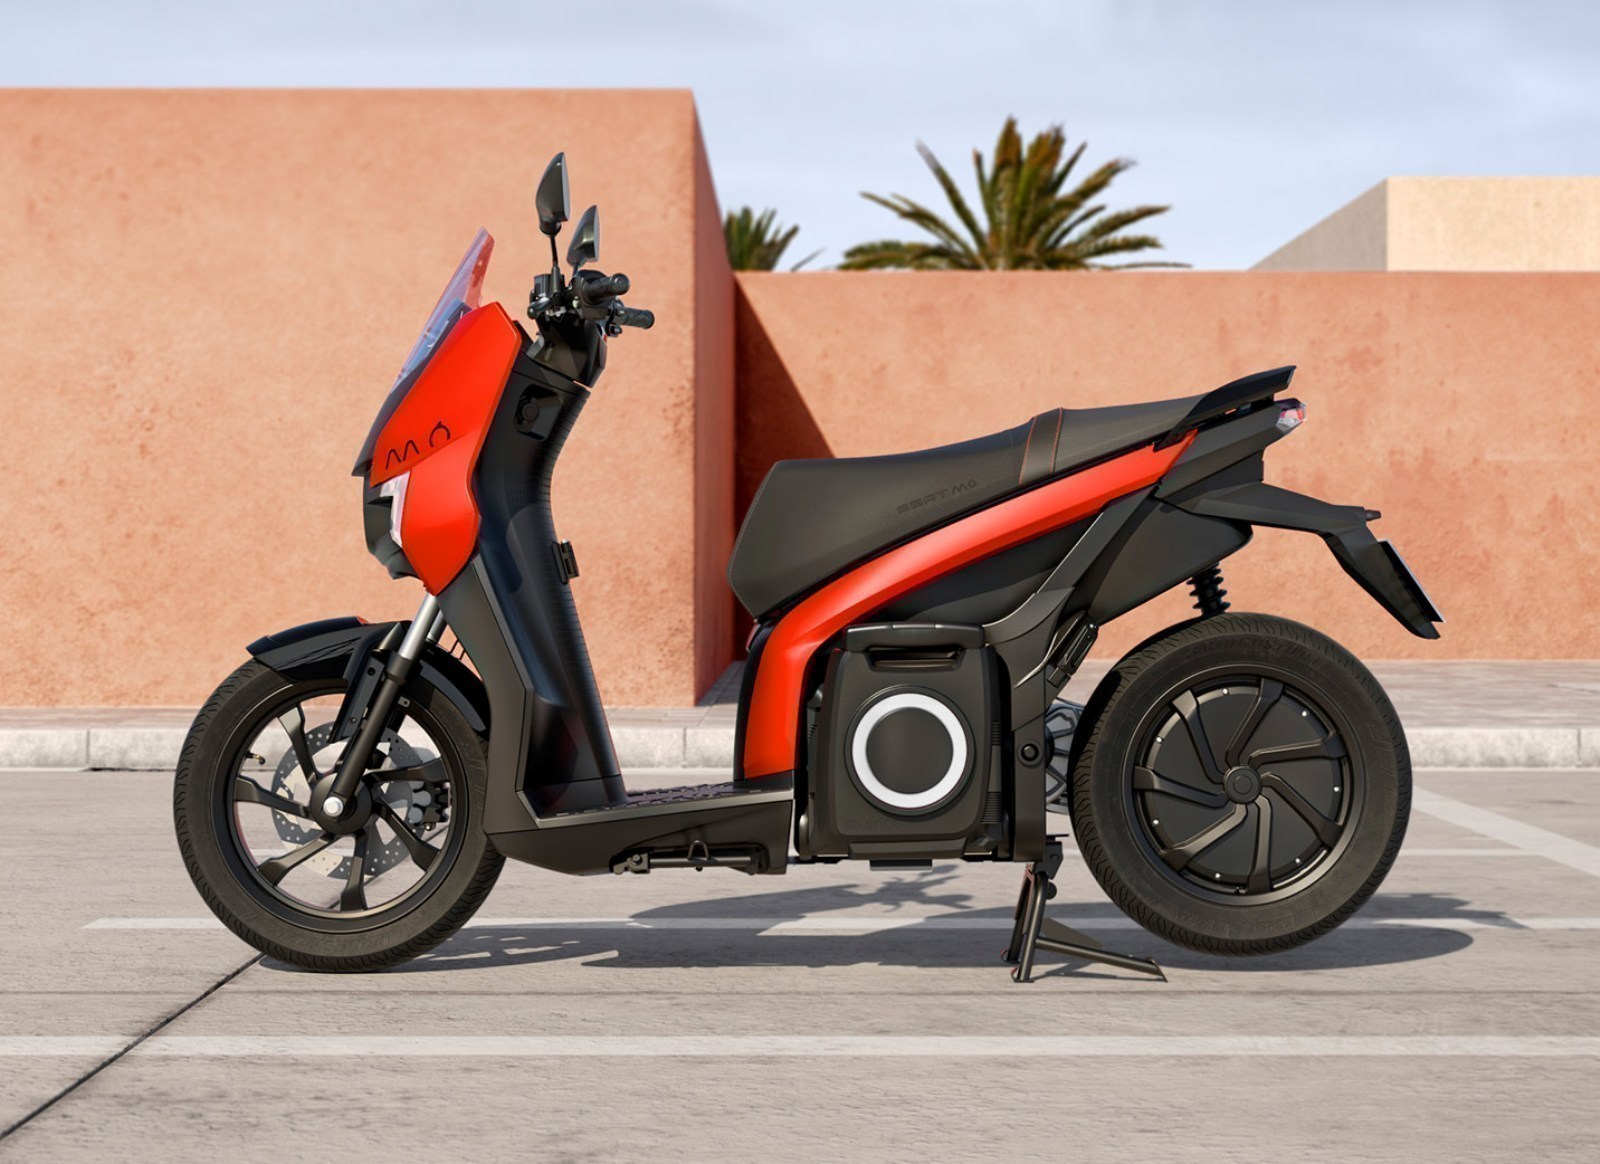 seat-mo-escooter125-performance-electric-motorcycle-battery-removable-vie.jpg